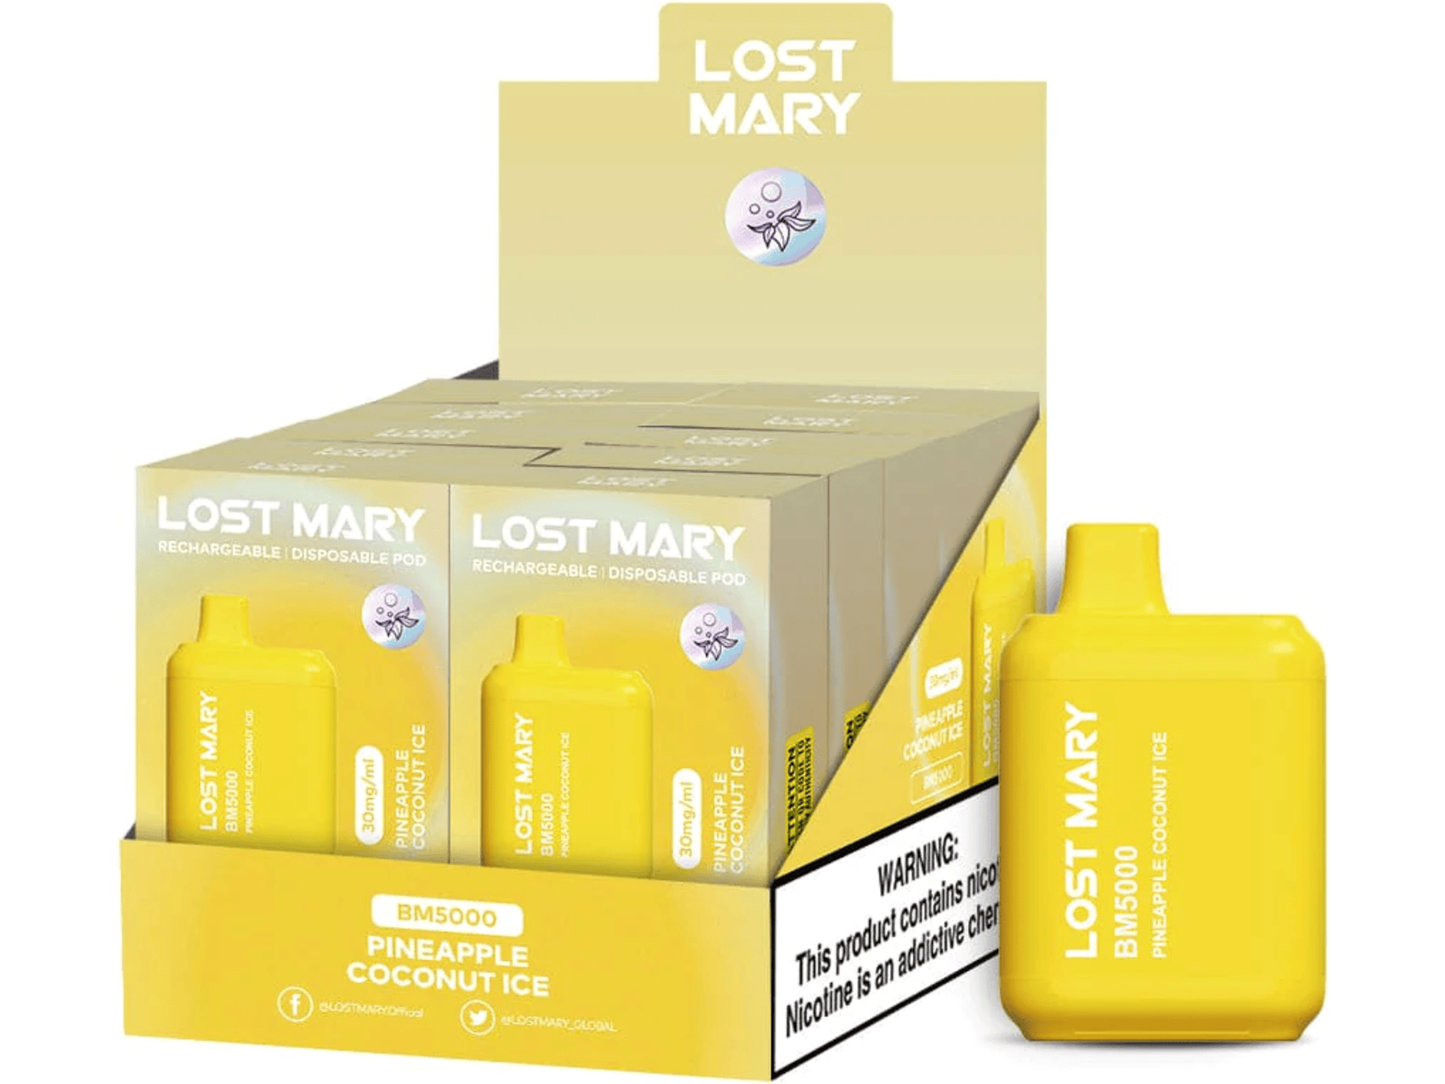 Lost Mary BM5000 Pineapple Coconut Ice flavored disposable vape and box.